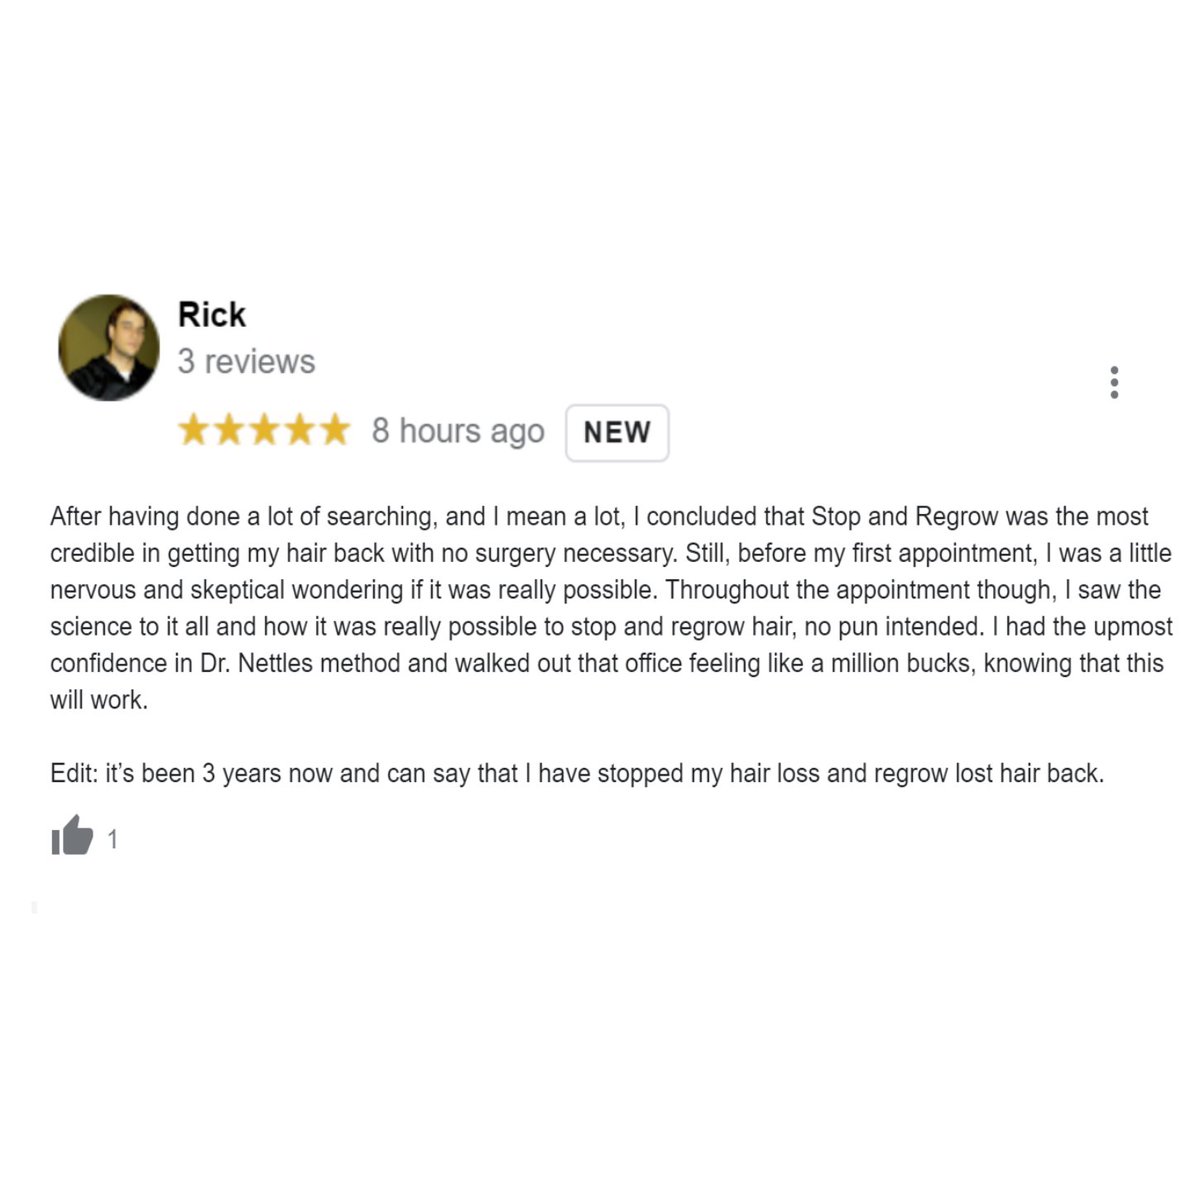 For more info visit our website: stopandregrow.com

#hairfood #hairnutrients #foodsmedicine #hairregrowth #regrowhair #hairlosssolution #hairlossstreatment #hairlosshelp #hairfood #stophairloss #hairlossscure #HairlossAuthority #hairlossinwomen#testimonials #anicereview